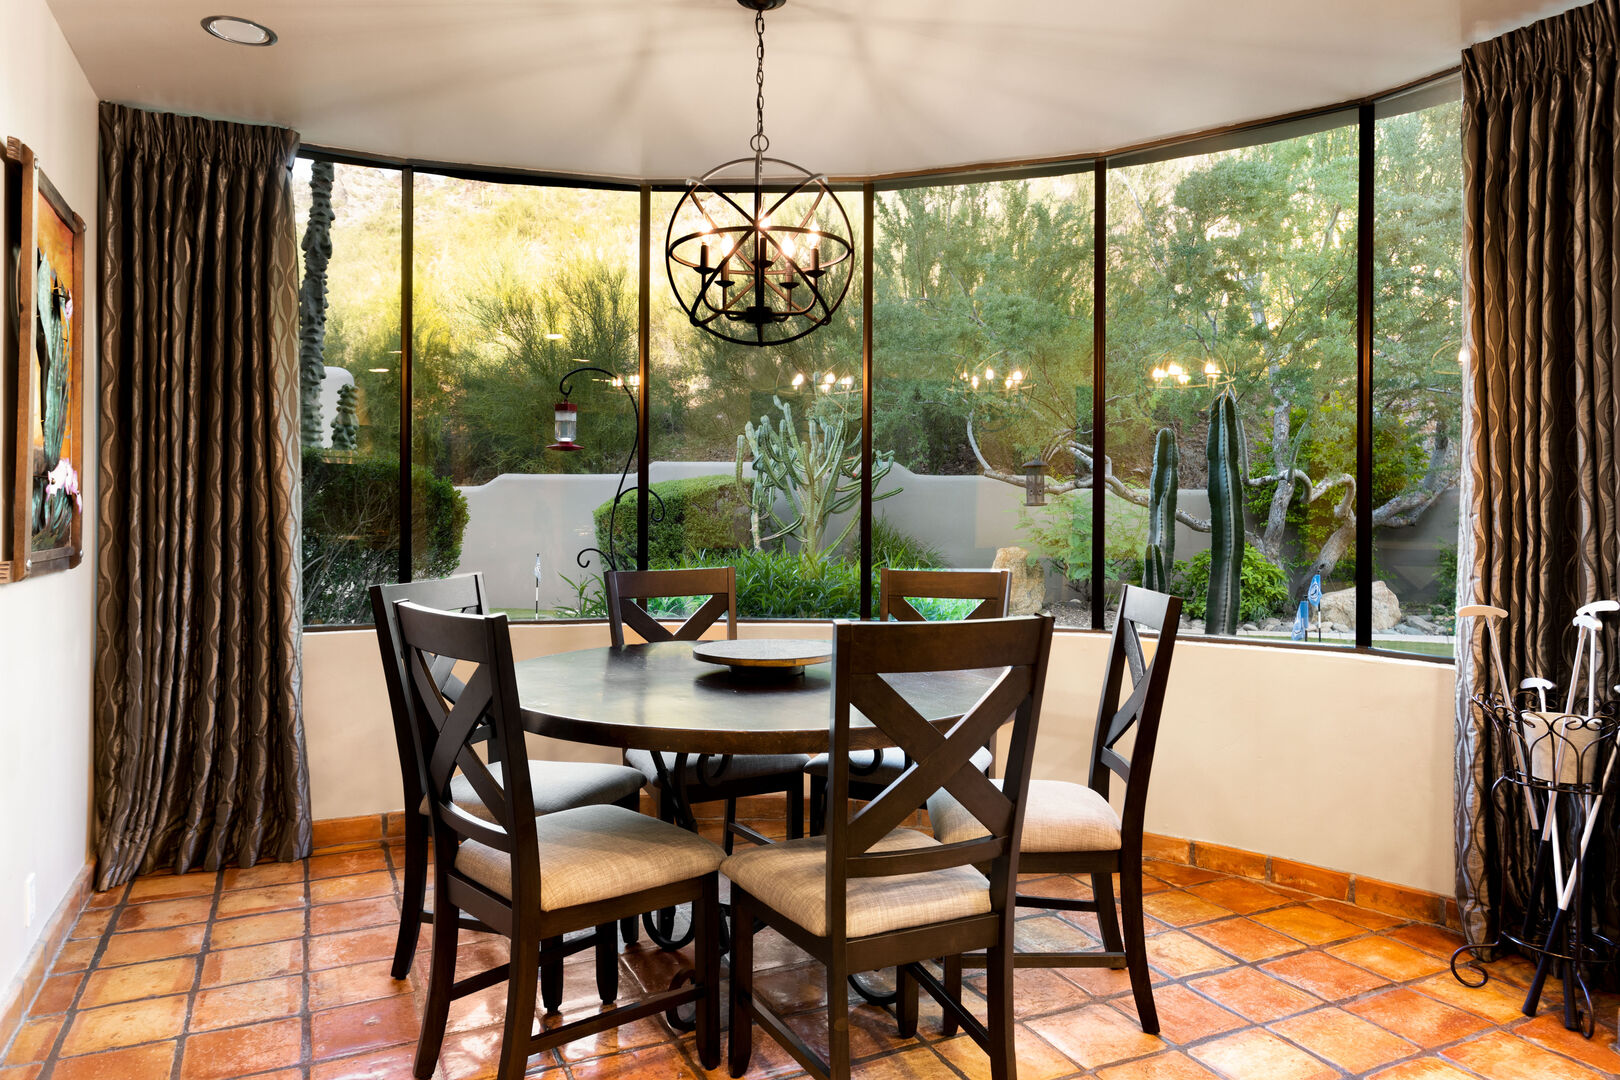 Breakfast Nook w/ Seating for 6 + 10 at Formal Dining Table